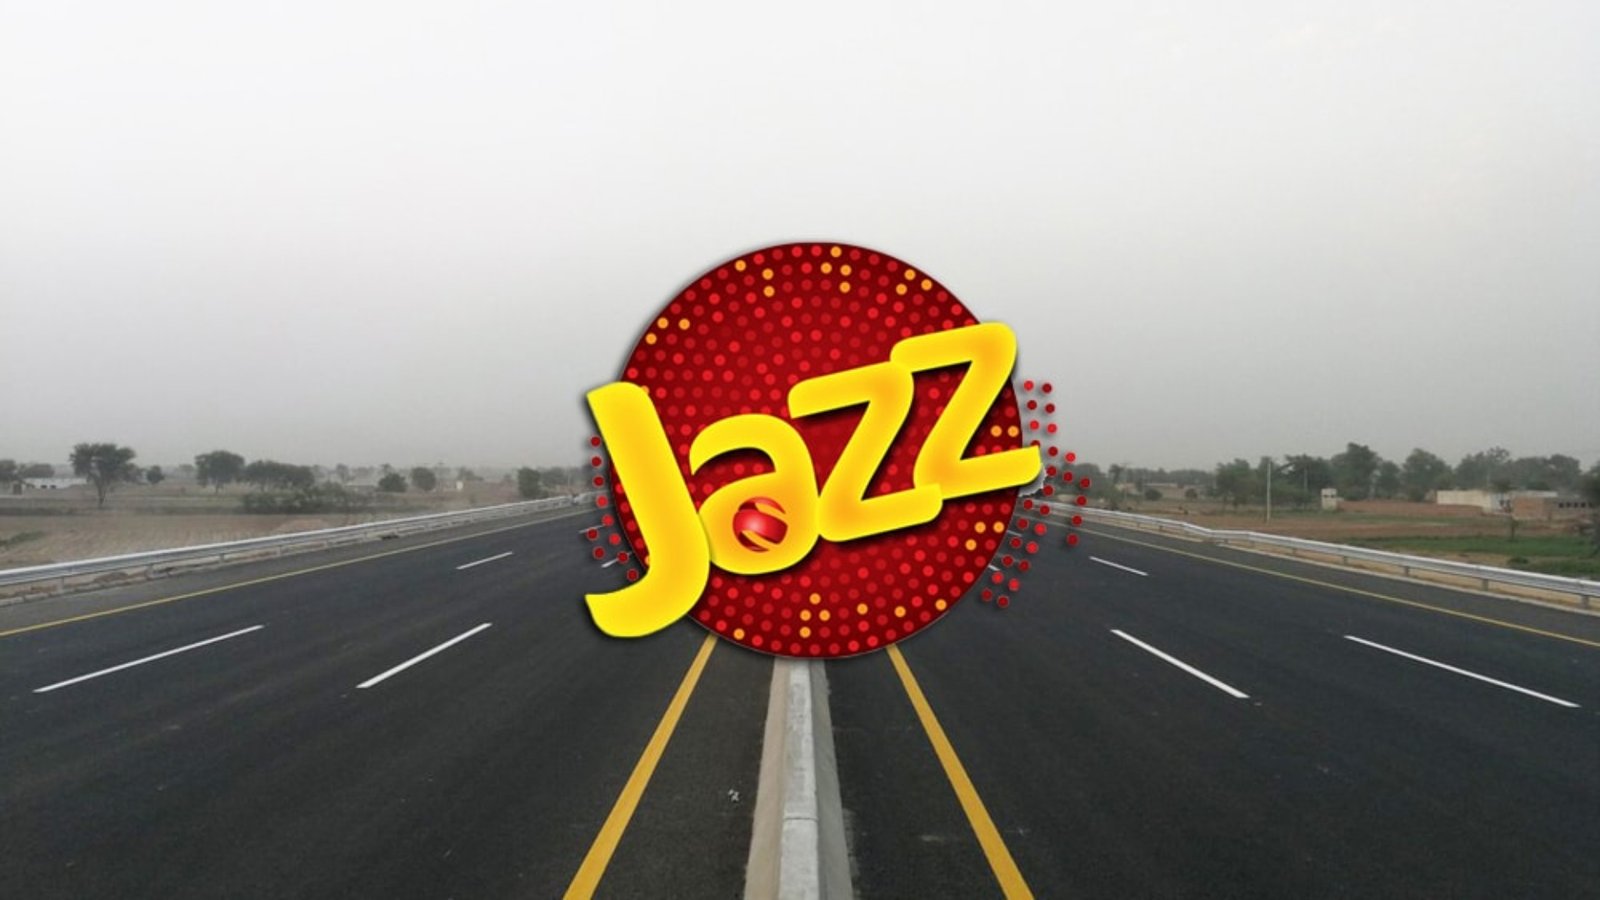 Jazz hit by financial scam